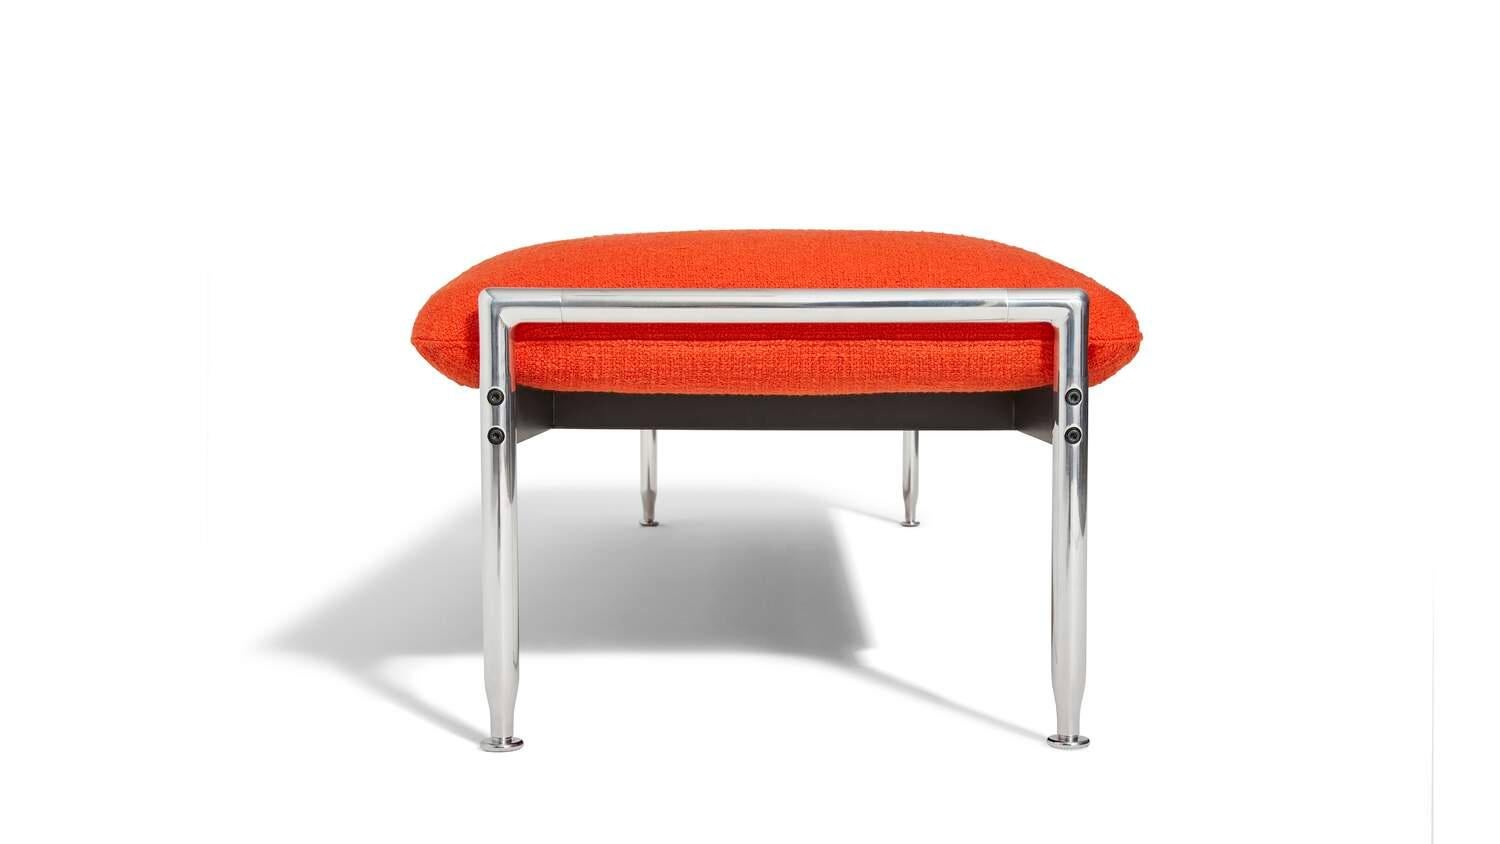 Antonio Citterio Esosoft Bench
Manufactured by Cassina in Itlay

A living room system designed to define the domestic landscape in a fluid, flexible manner. This is Esosoft ? the first project by Antonio Citterio for Cassina ? a modular sofa that